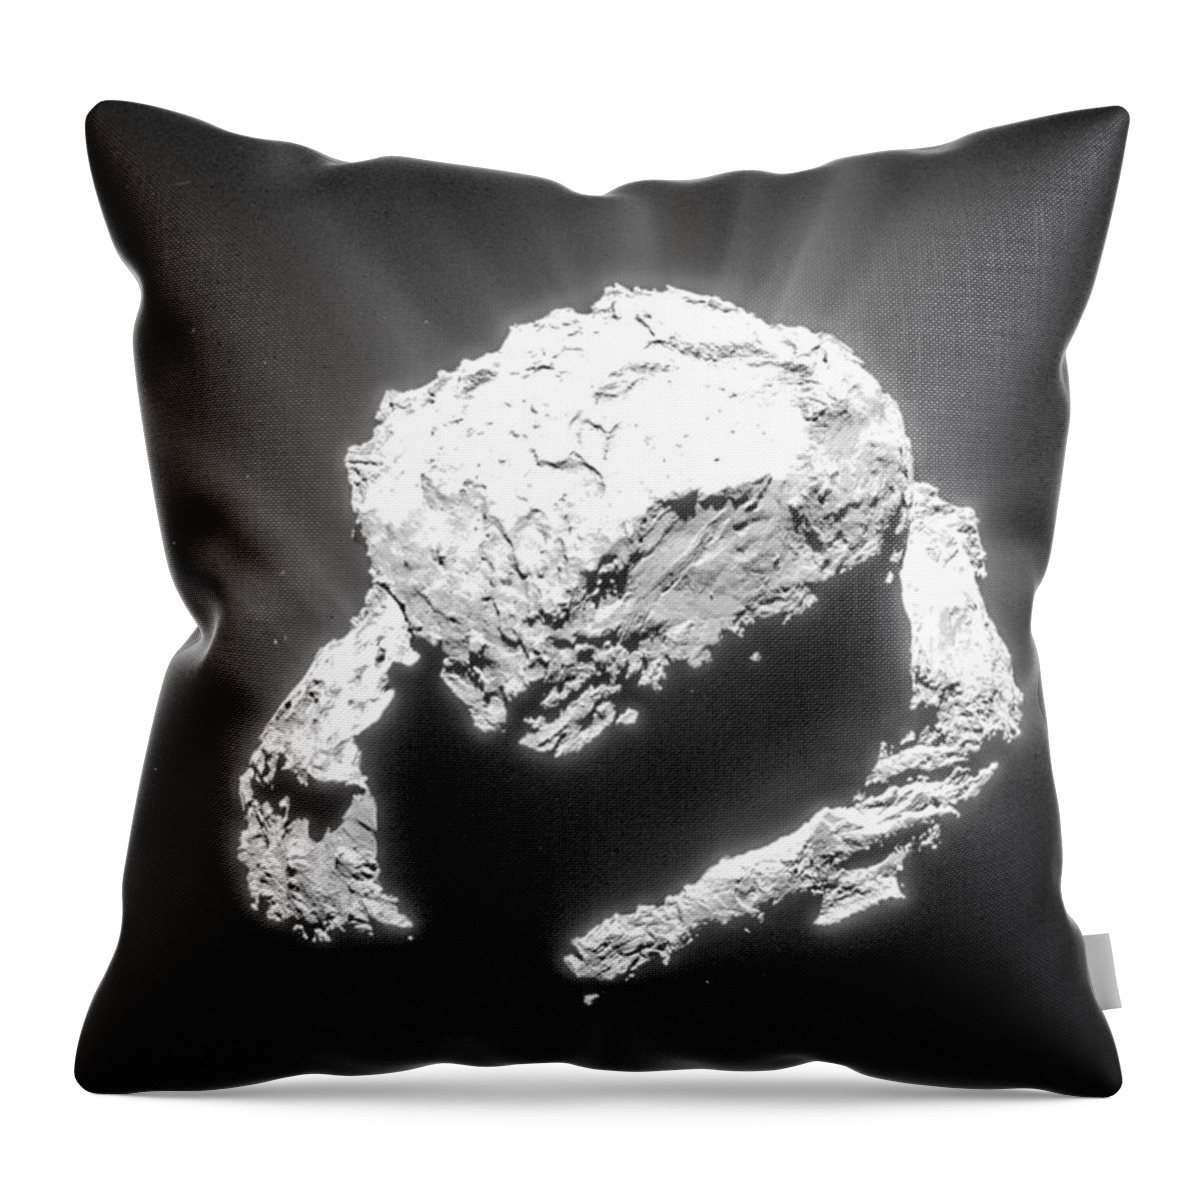 Comet Throw Pillow featuring the photograph Comet 67pchuryumov-gerasimenko #7 by Science Source